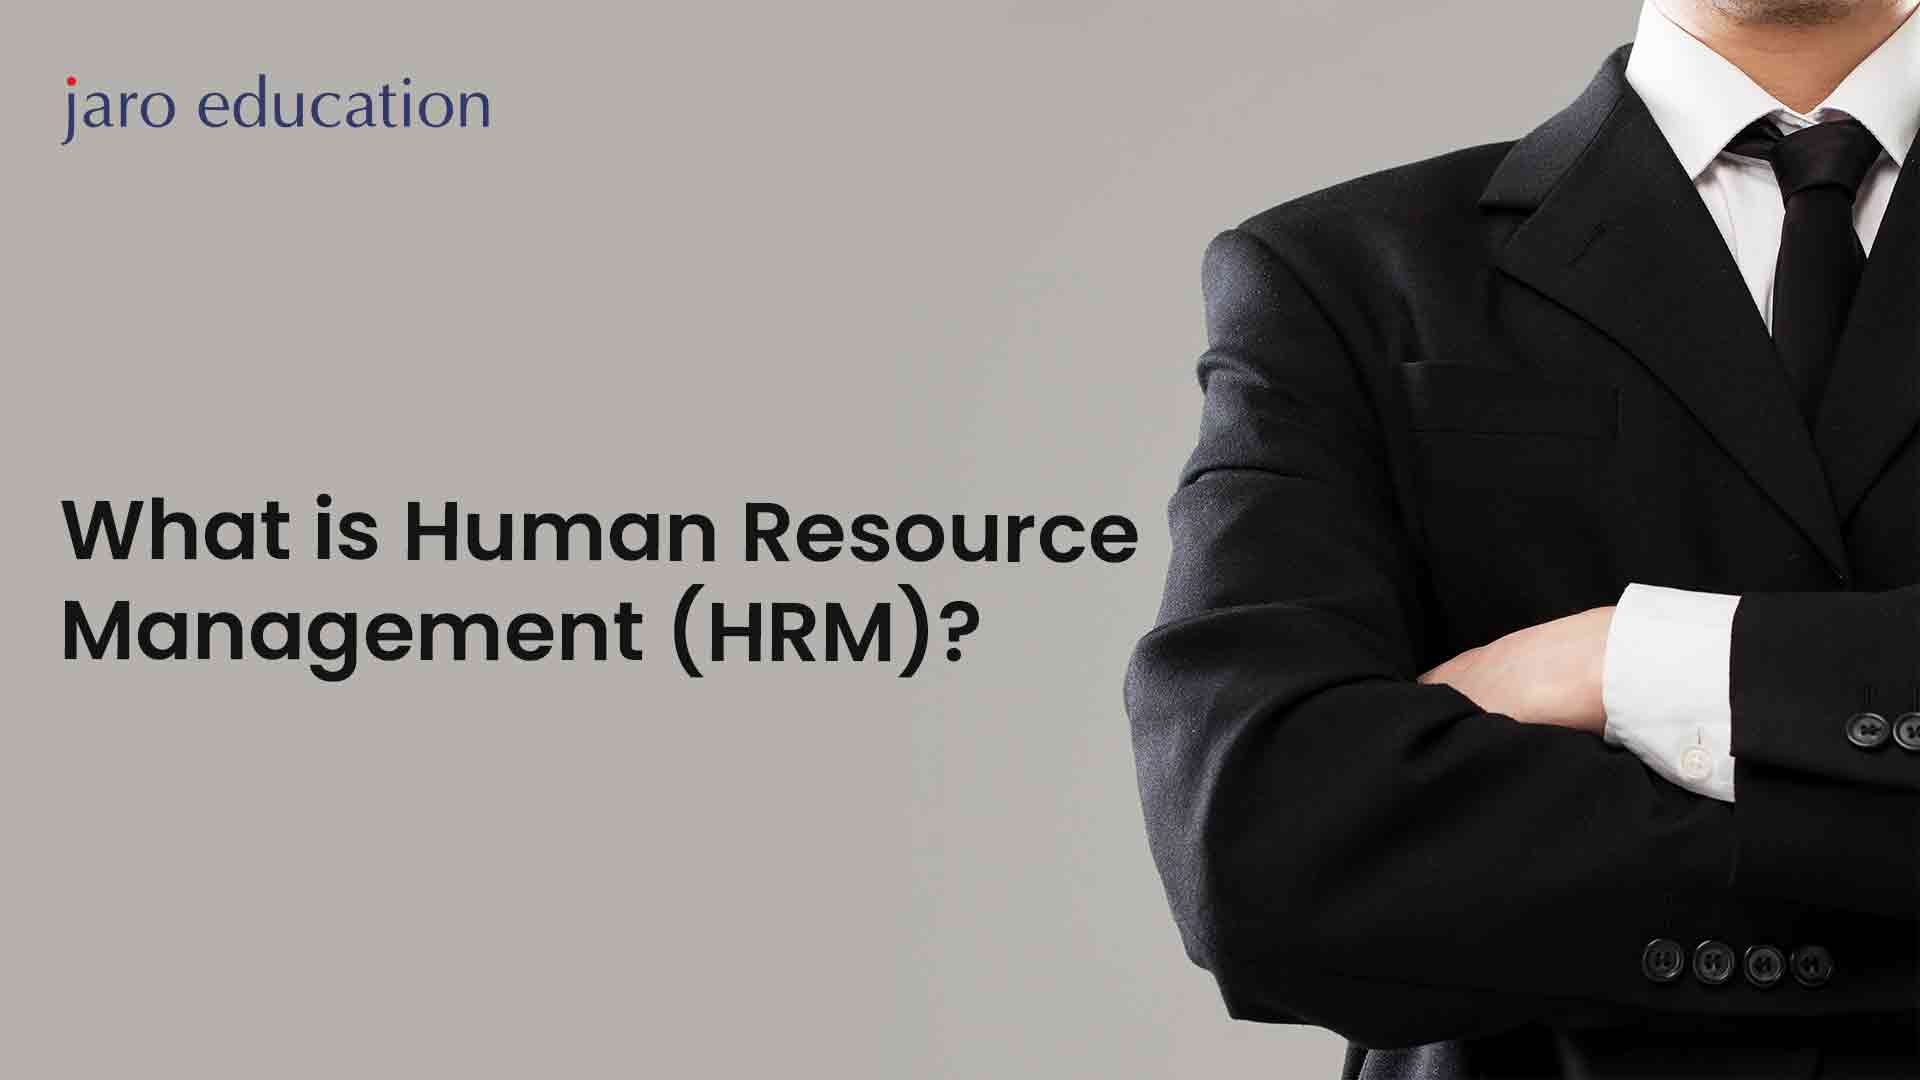 What is Human Resource Management (HRM)